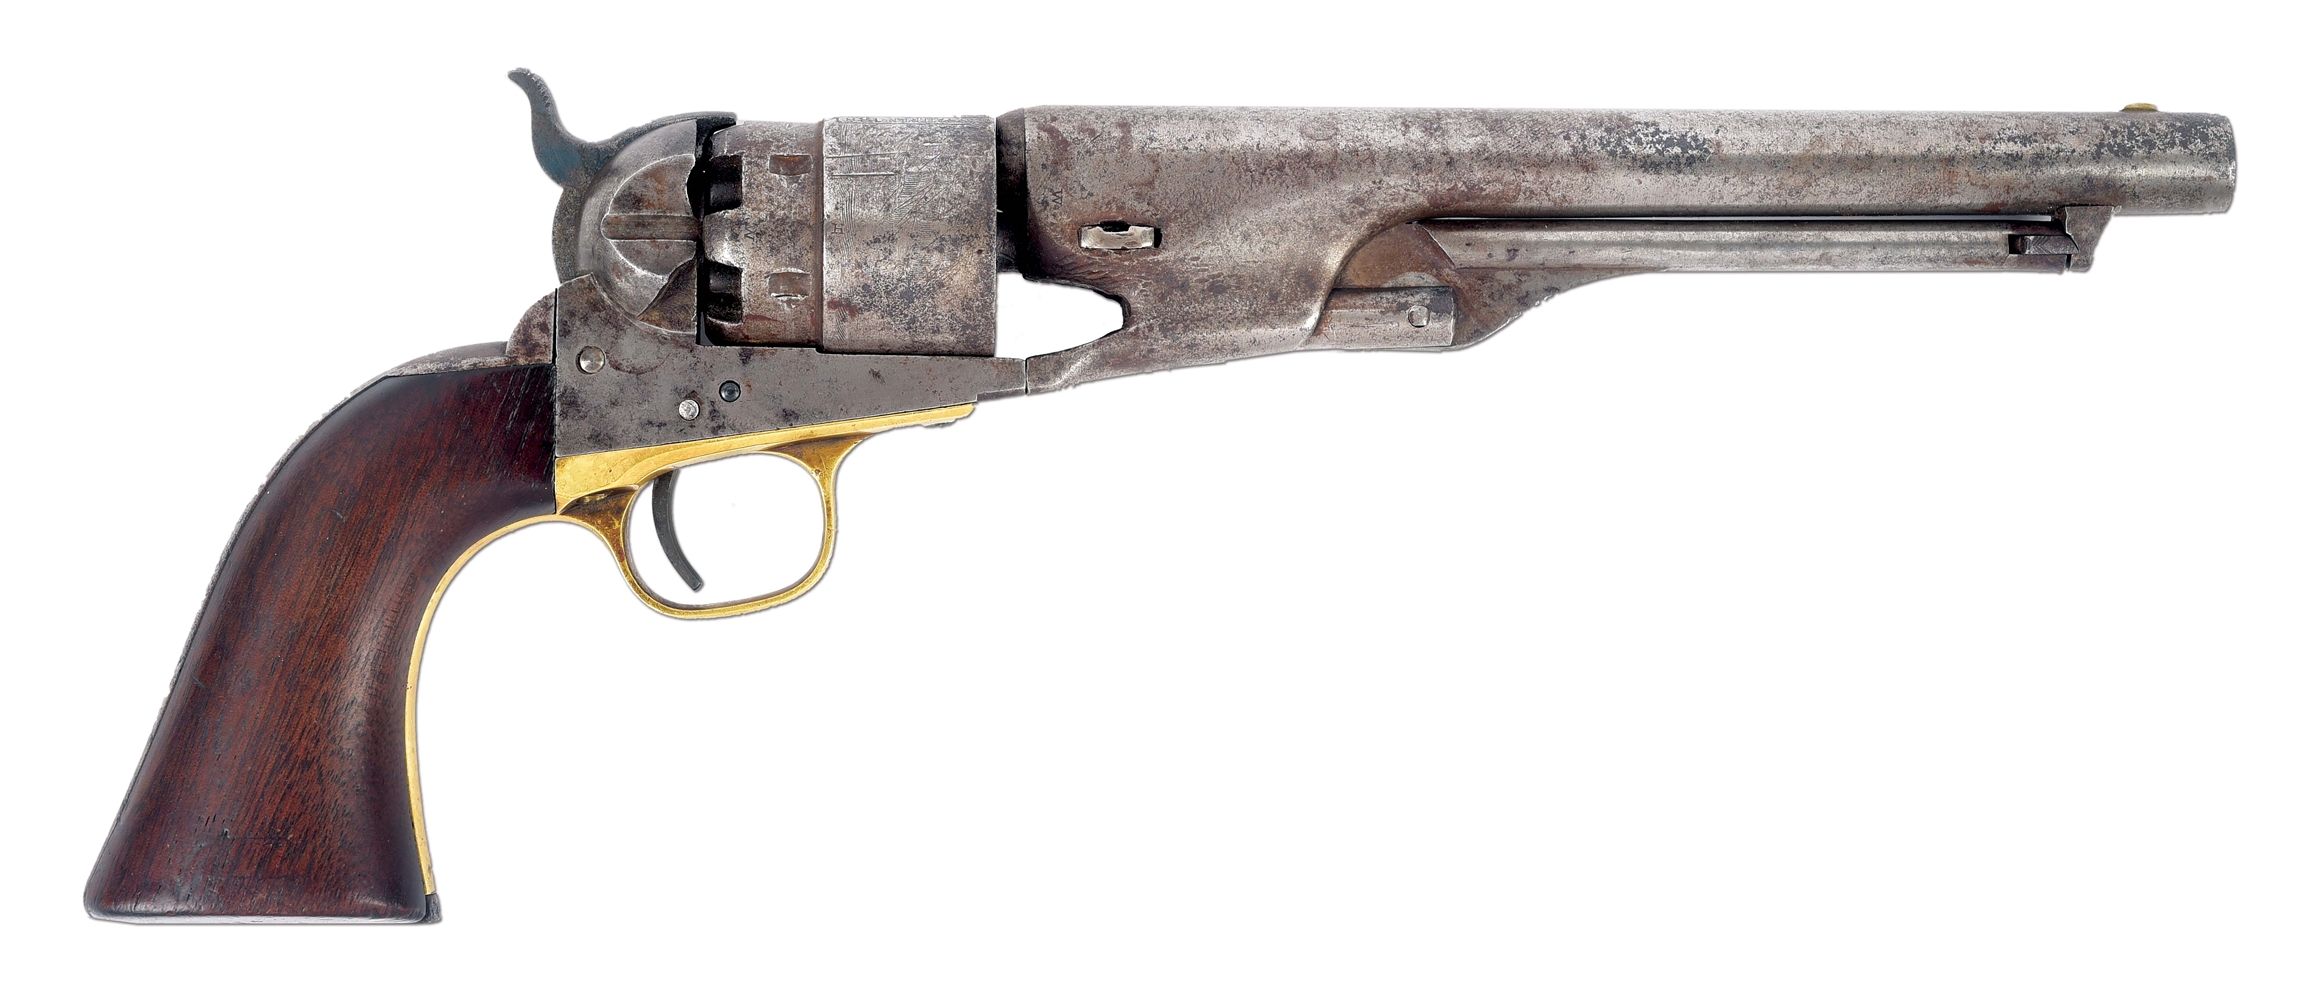 (A) MARTIALLY MARKED COLT MODEL 1860 ARMY PERCUSSION REVOLVER.